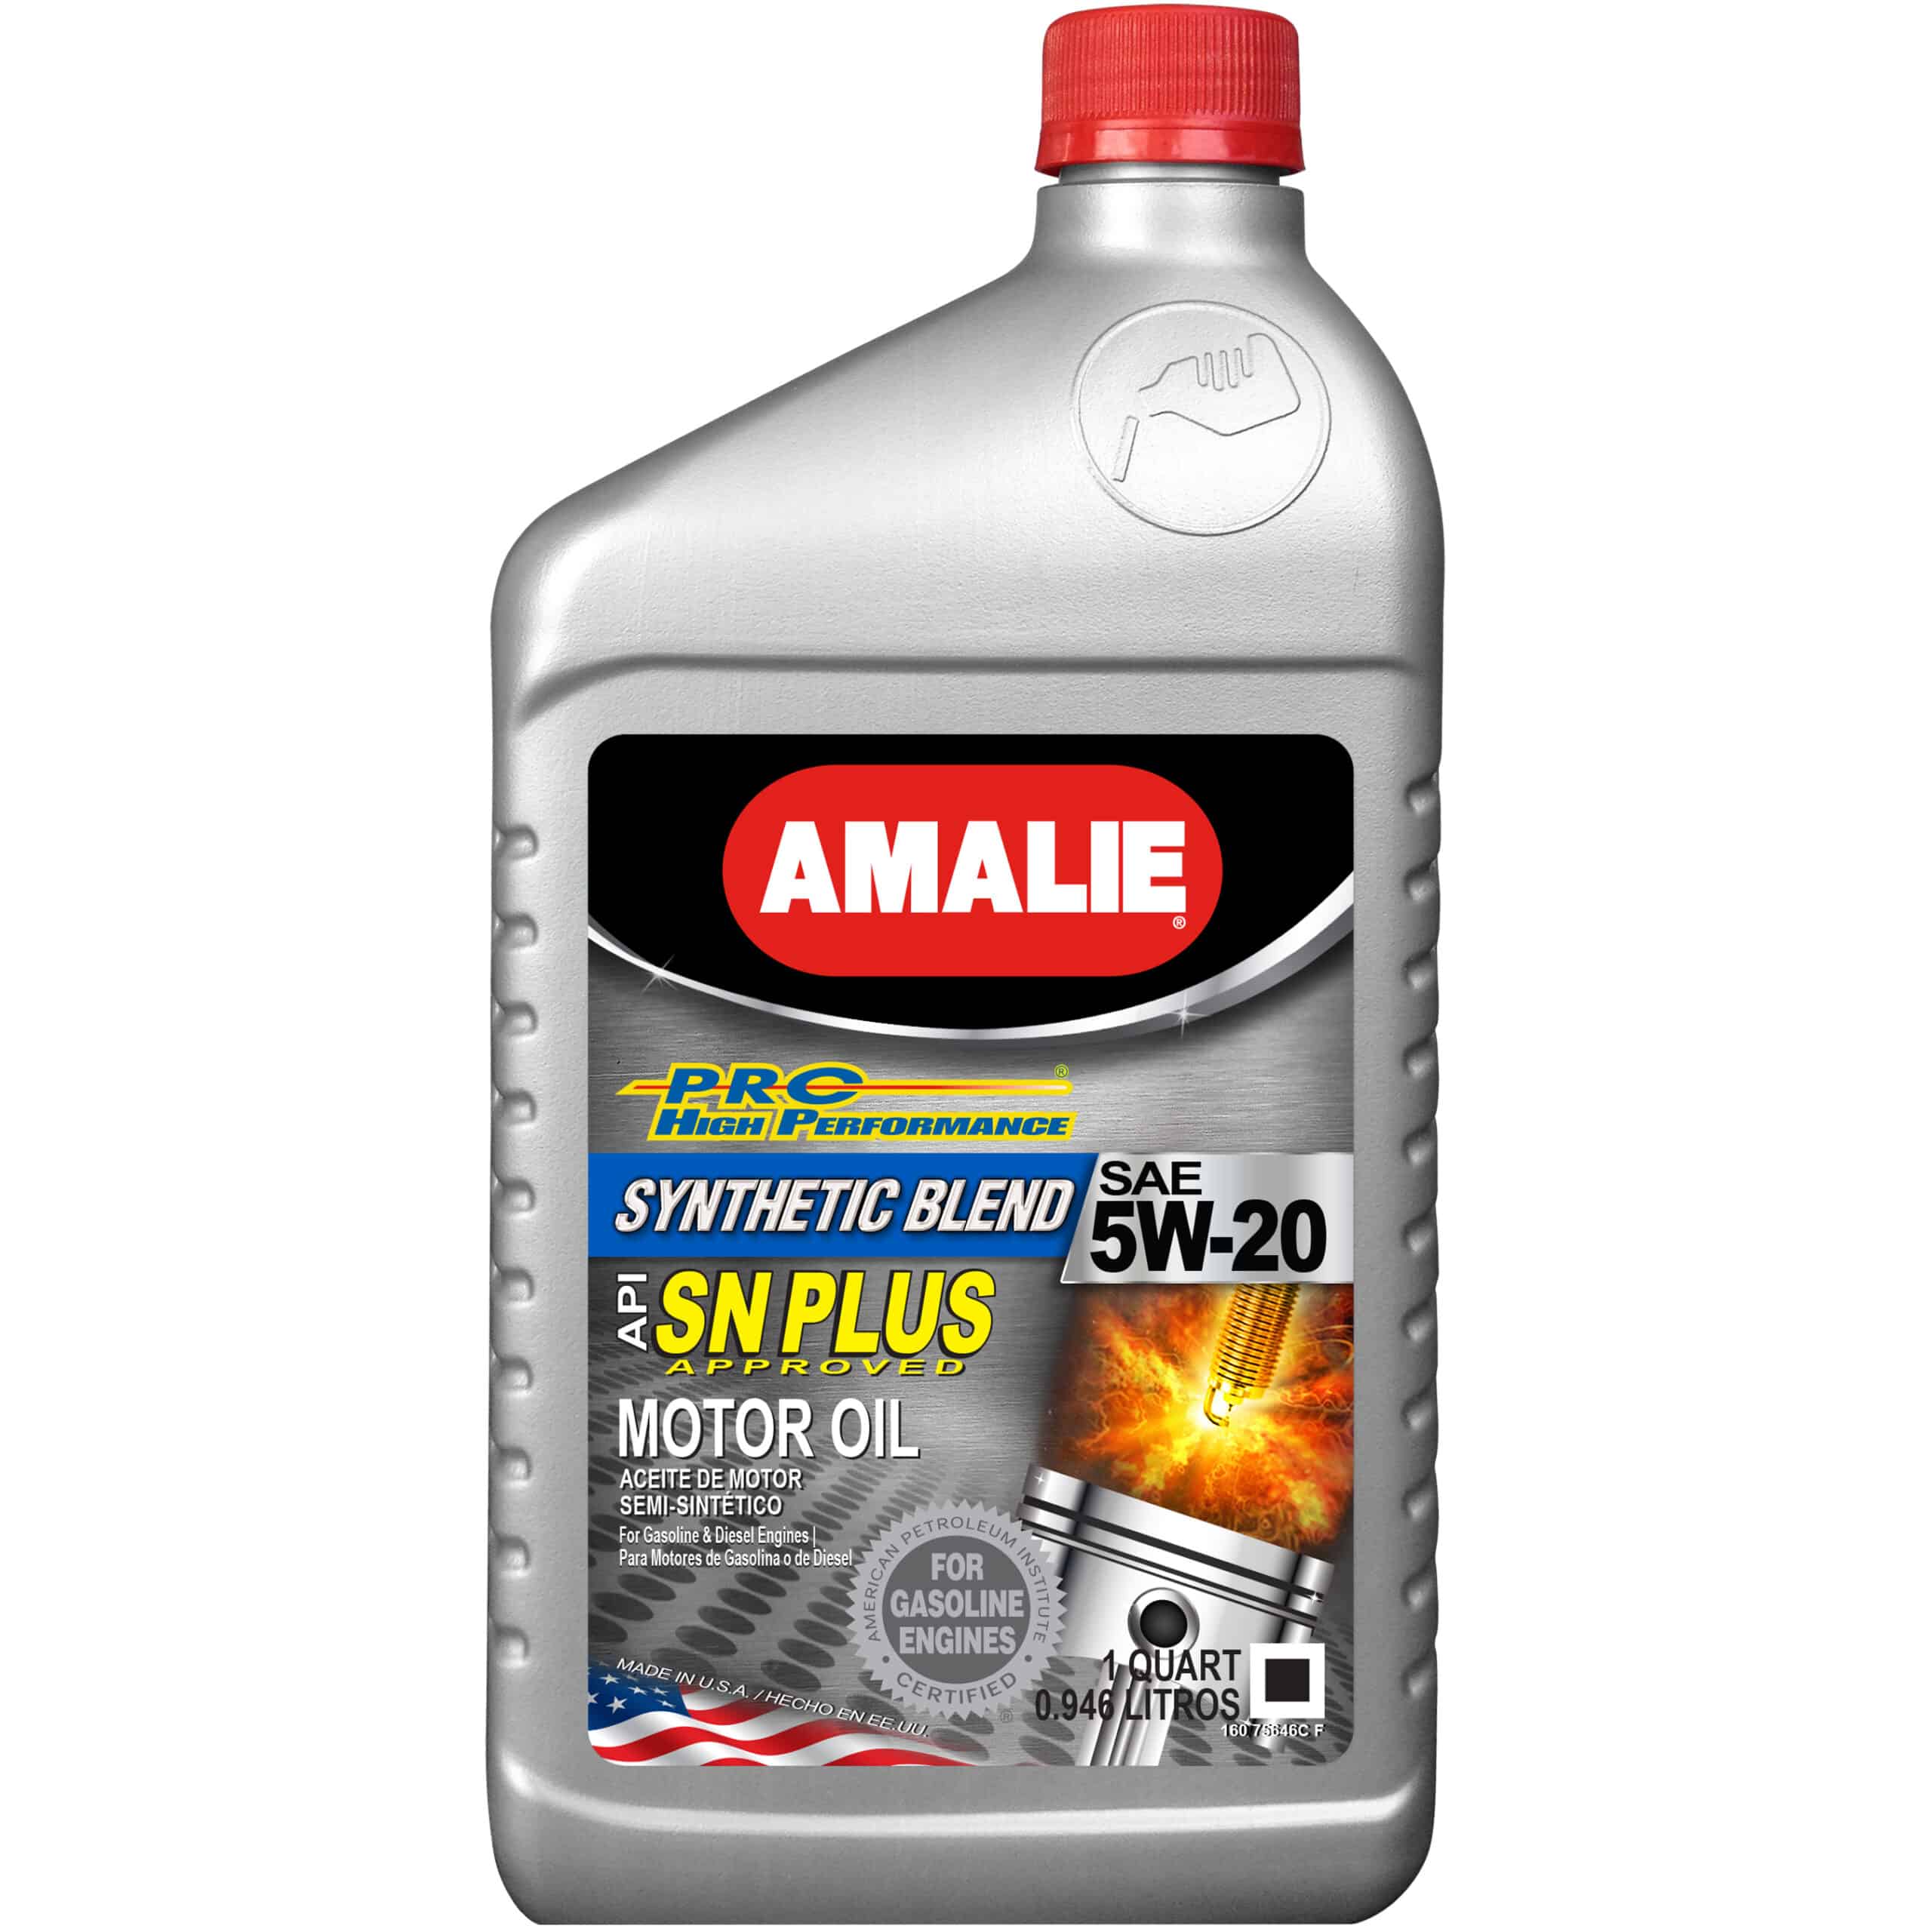 Amalie Oil Pro High Performance Synthetic Blend 5W-20 Case